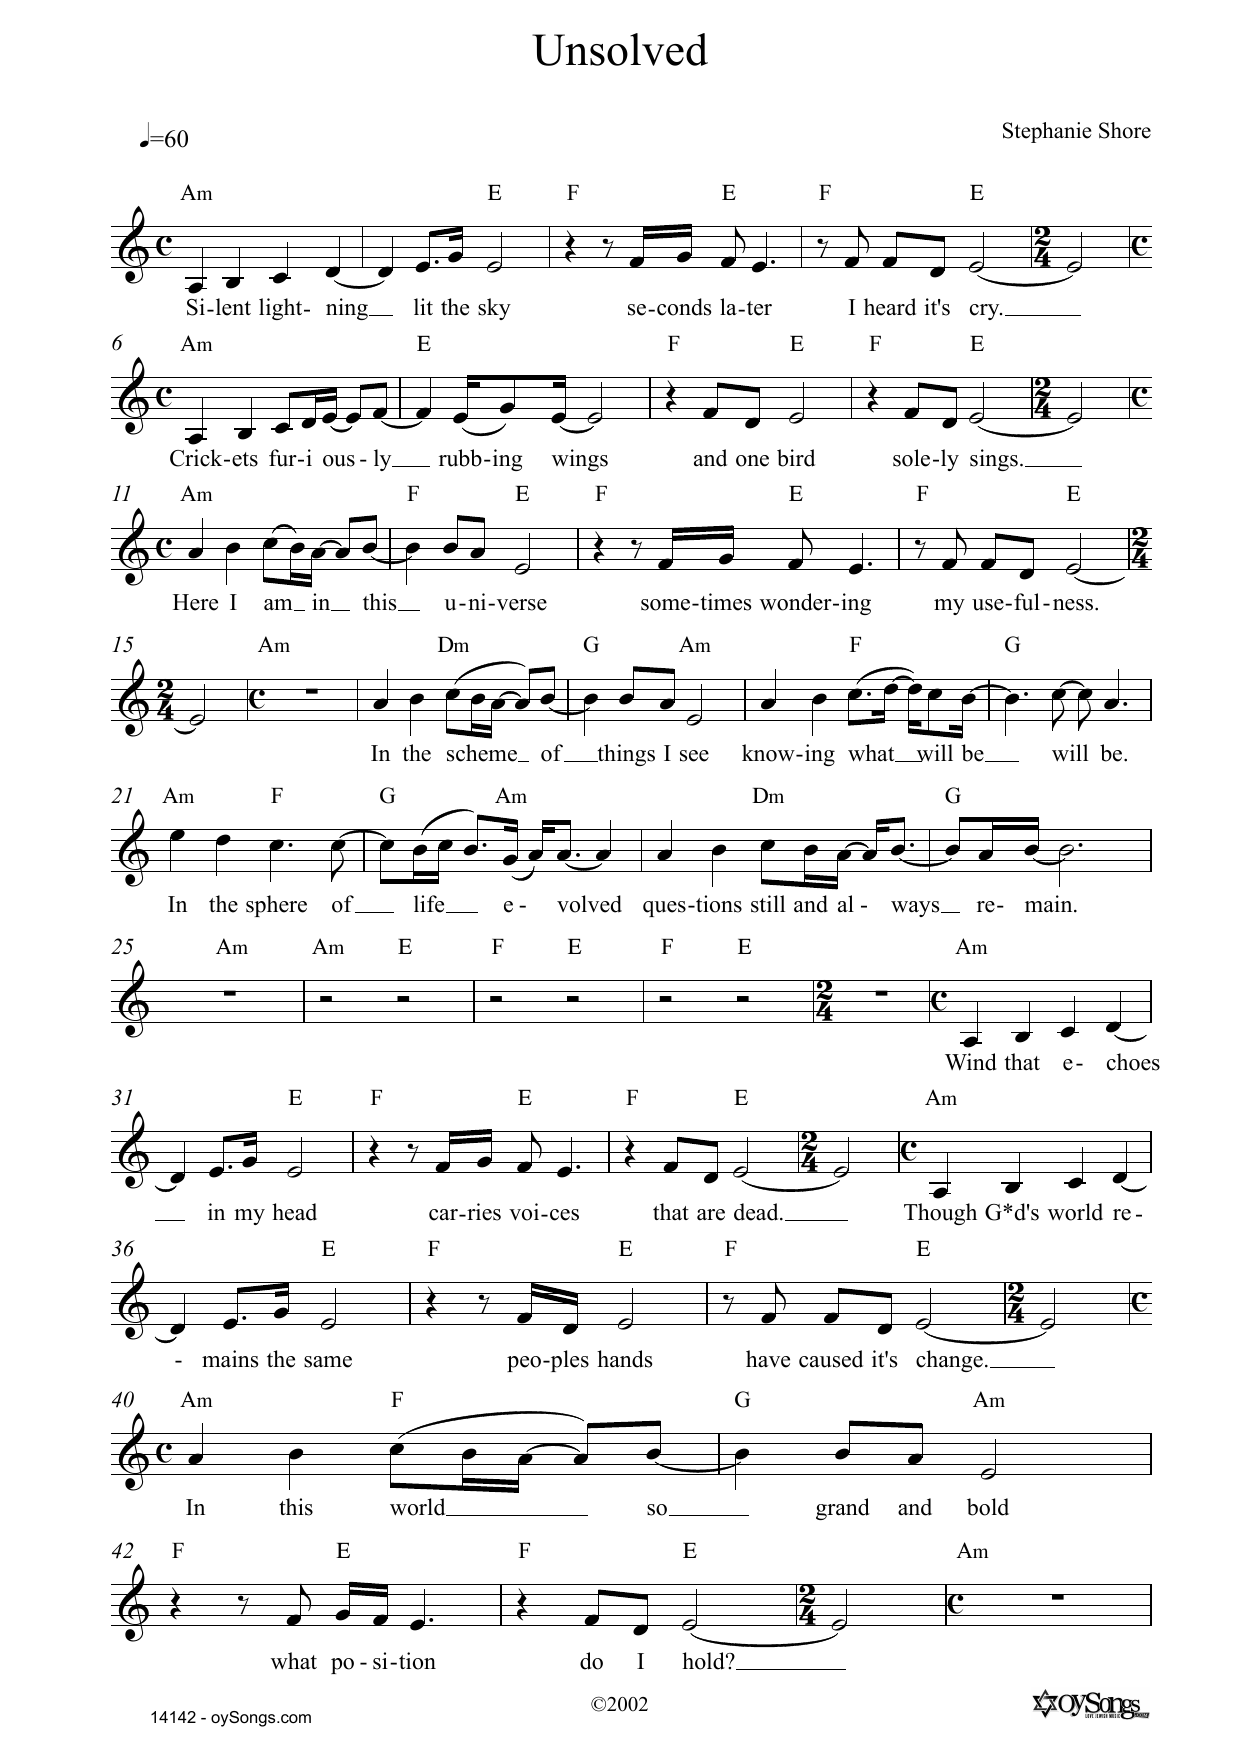 Download Stephanie Shore Unsolved Sheet Music